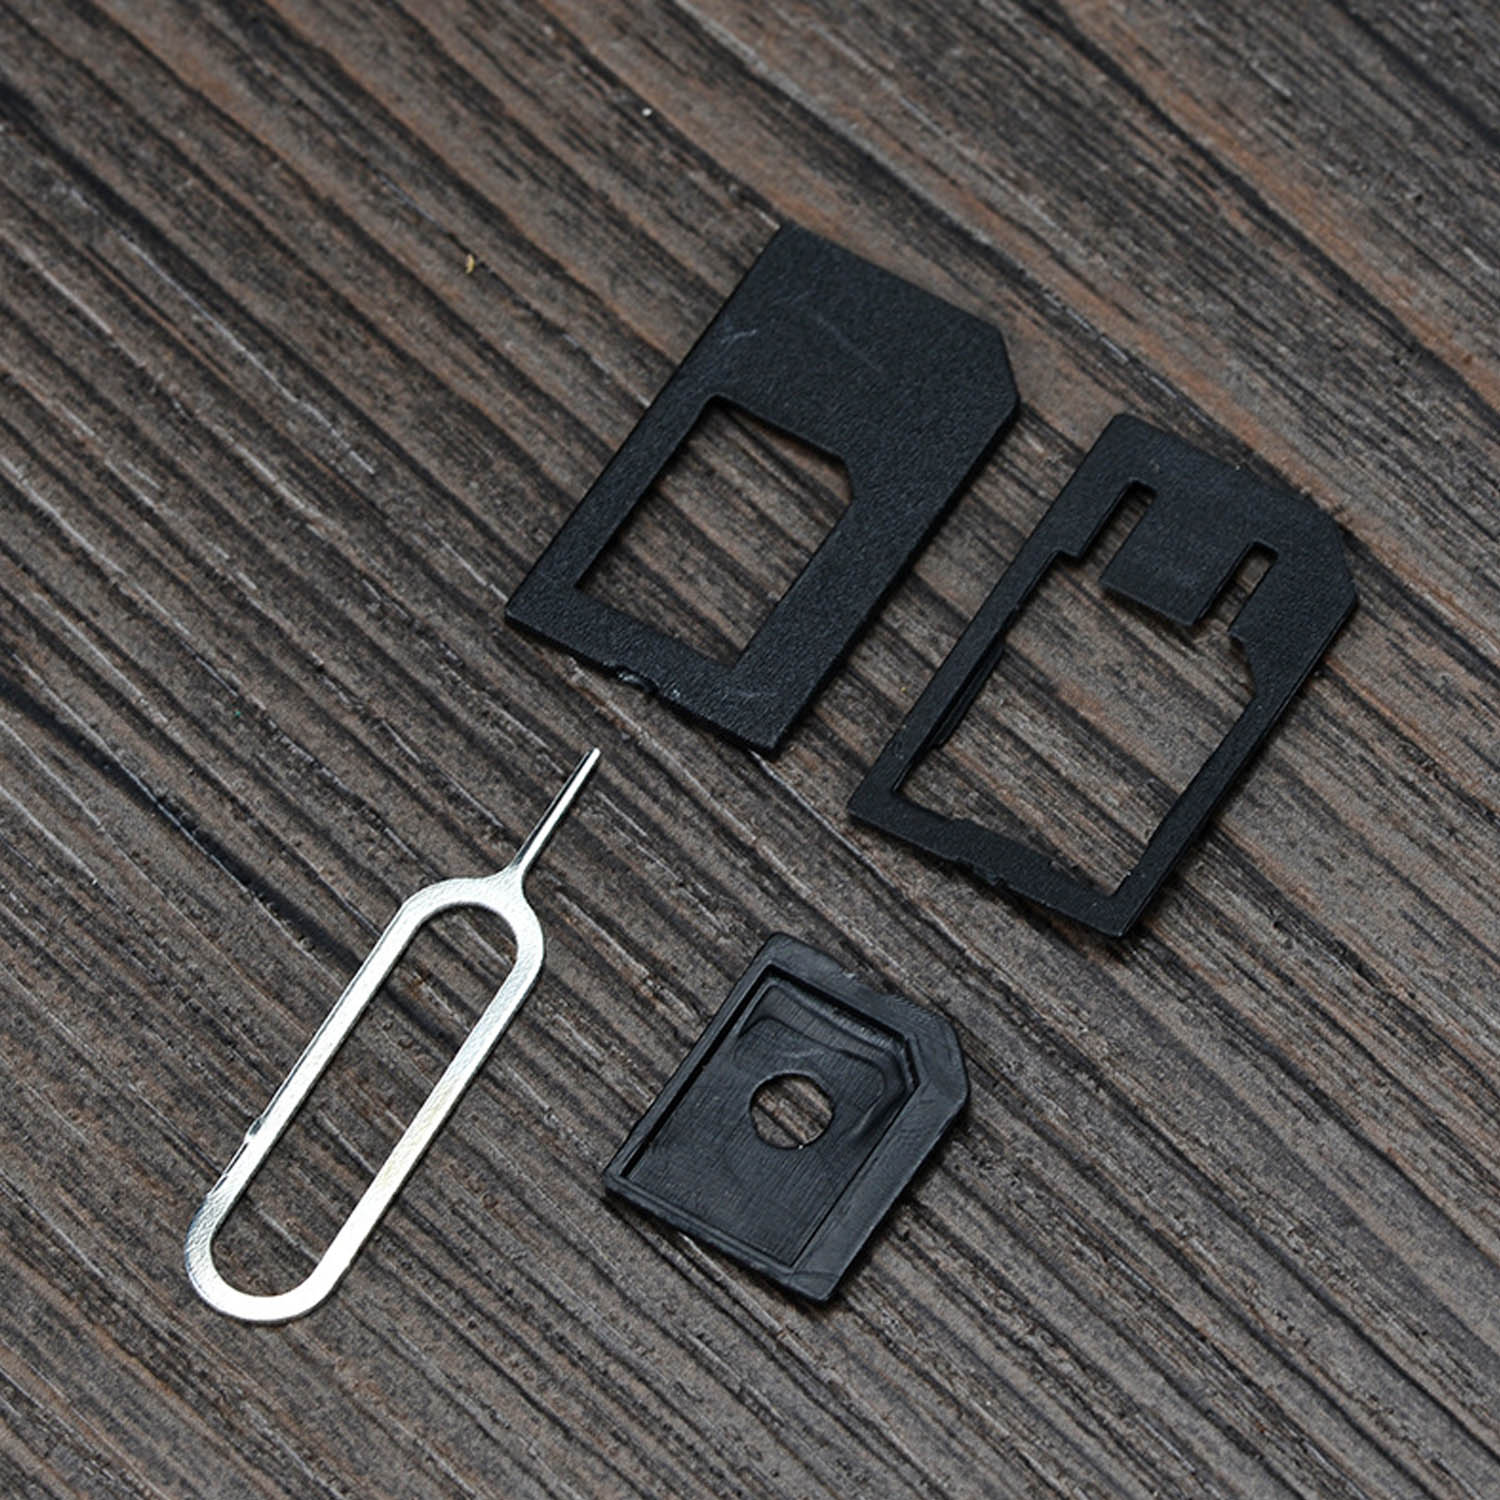 Besegad Dual 2 in 1 Micro SIM Cutter with Nano SIM Card Adapter Tray Open Needle for iPhone Samsung Xiaomi Mobile Phone Tablet